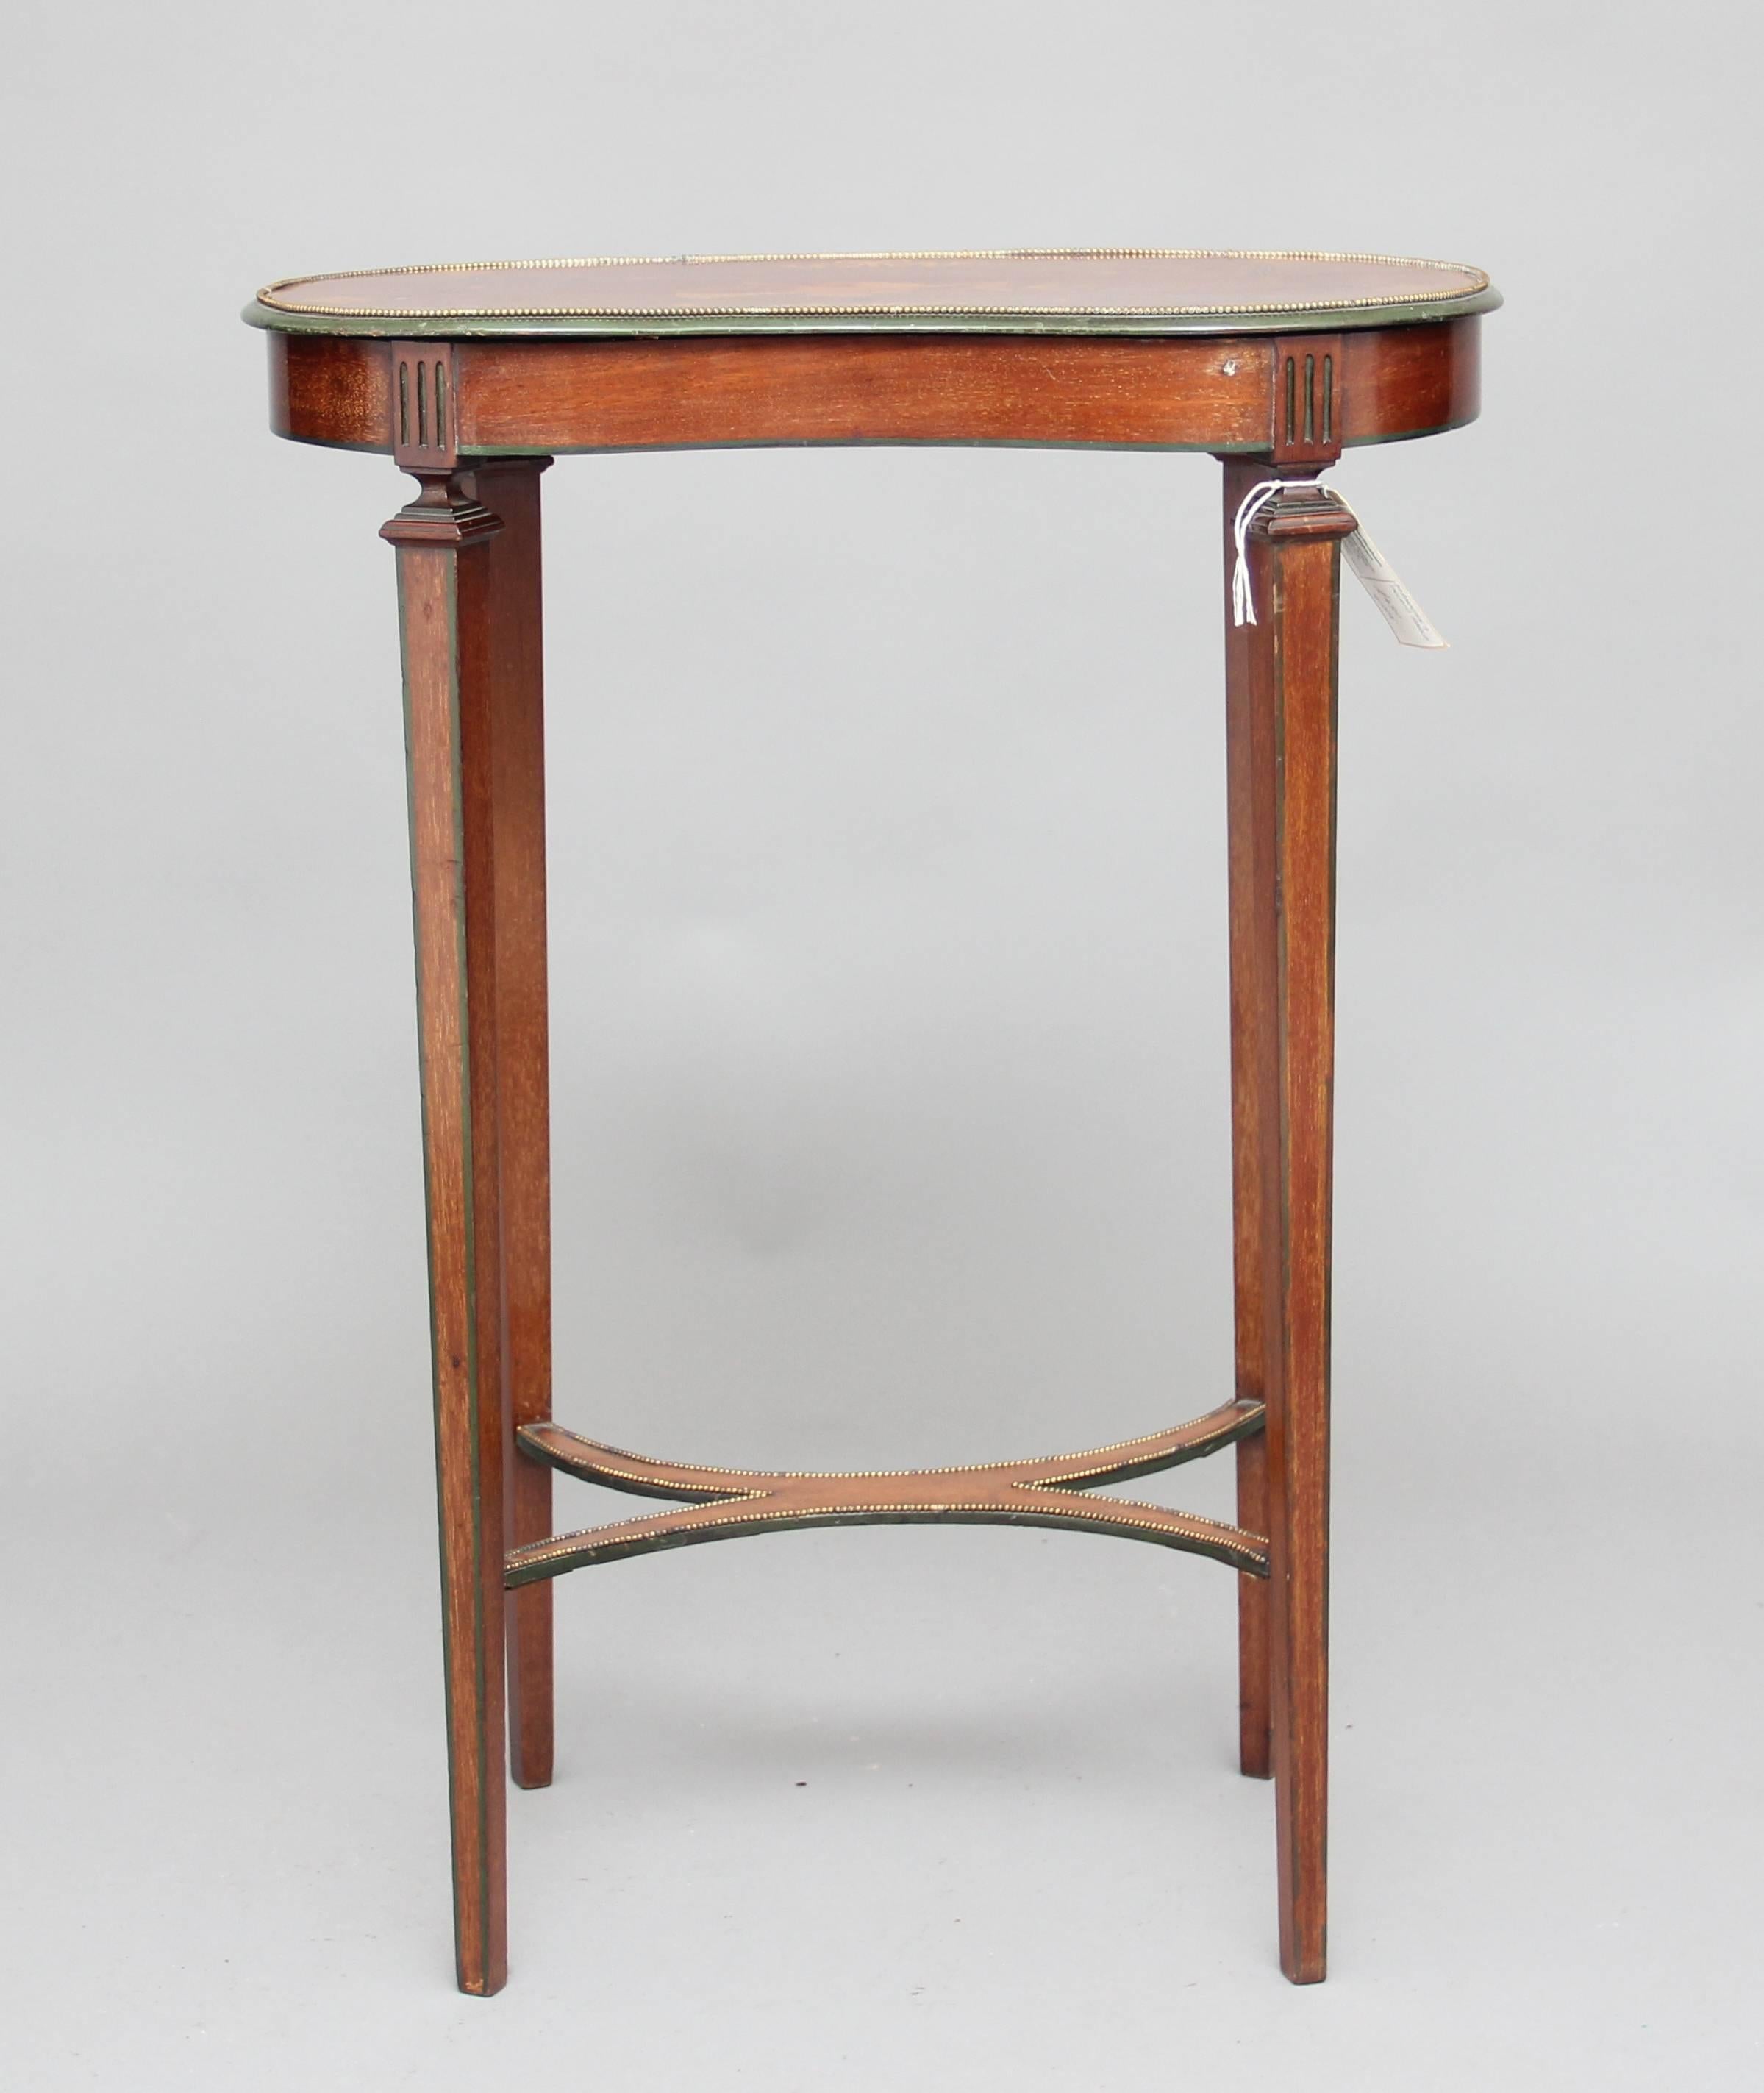 Early 20th century Edwardian kidney shaped Mahogany inlaid occasional table, the kidney shaped top inlaid with marquetry decorated with brass beading around the edge, supported on elegant square tapering legs united by a shaped stretcher, circa